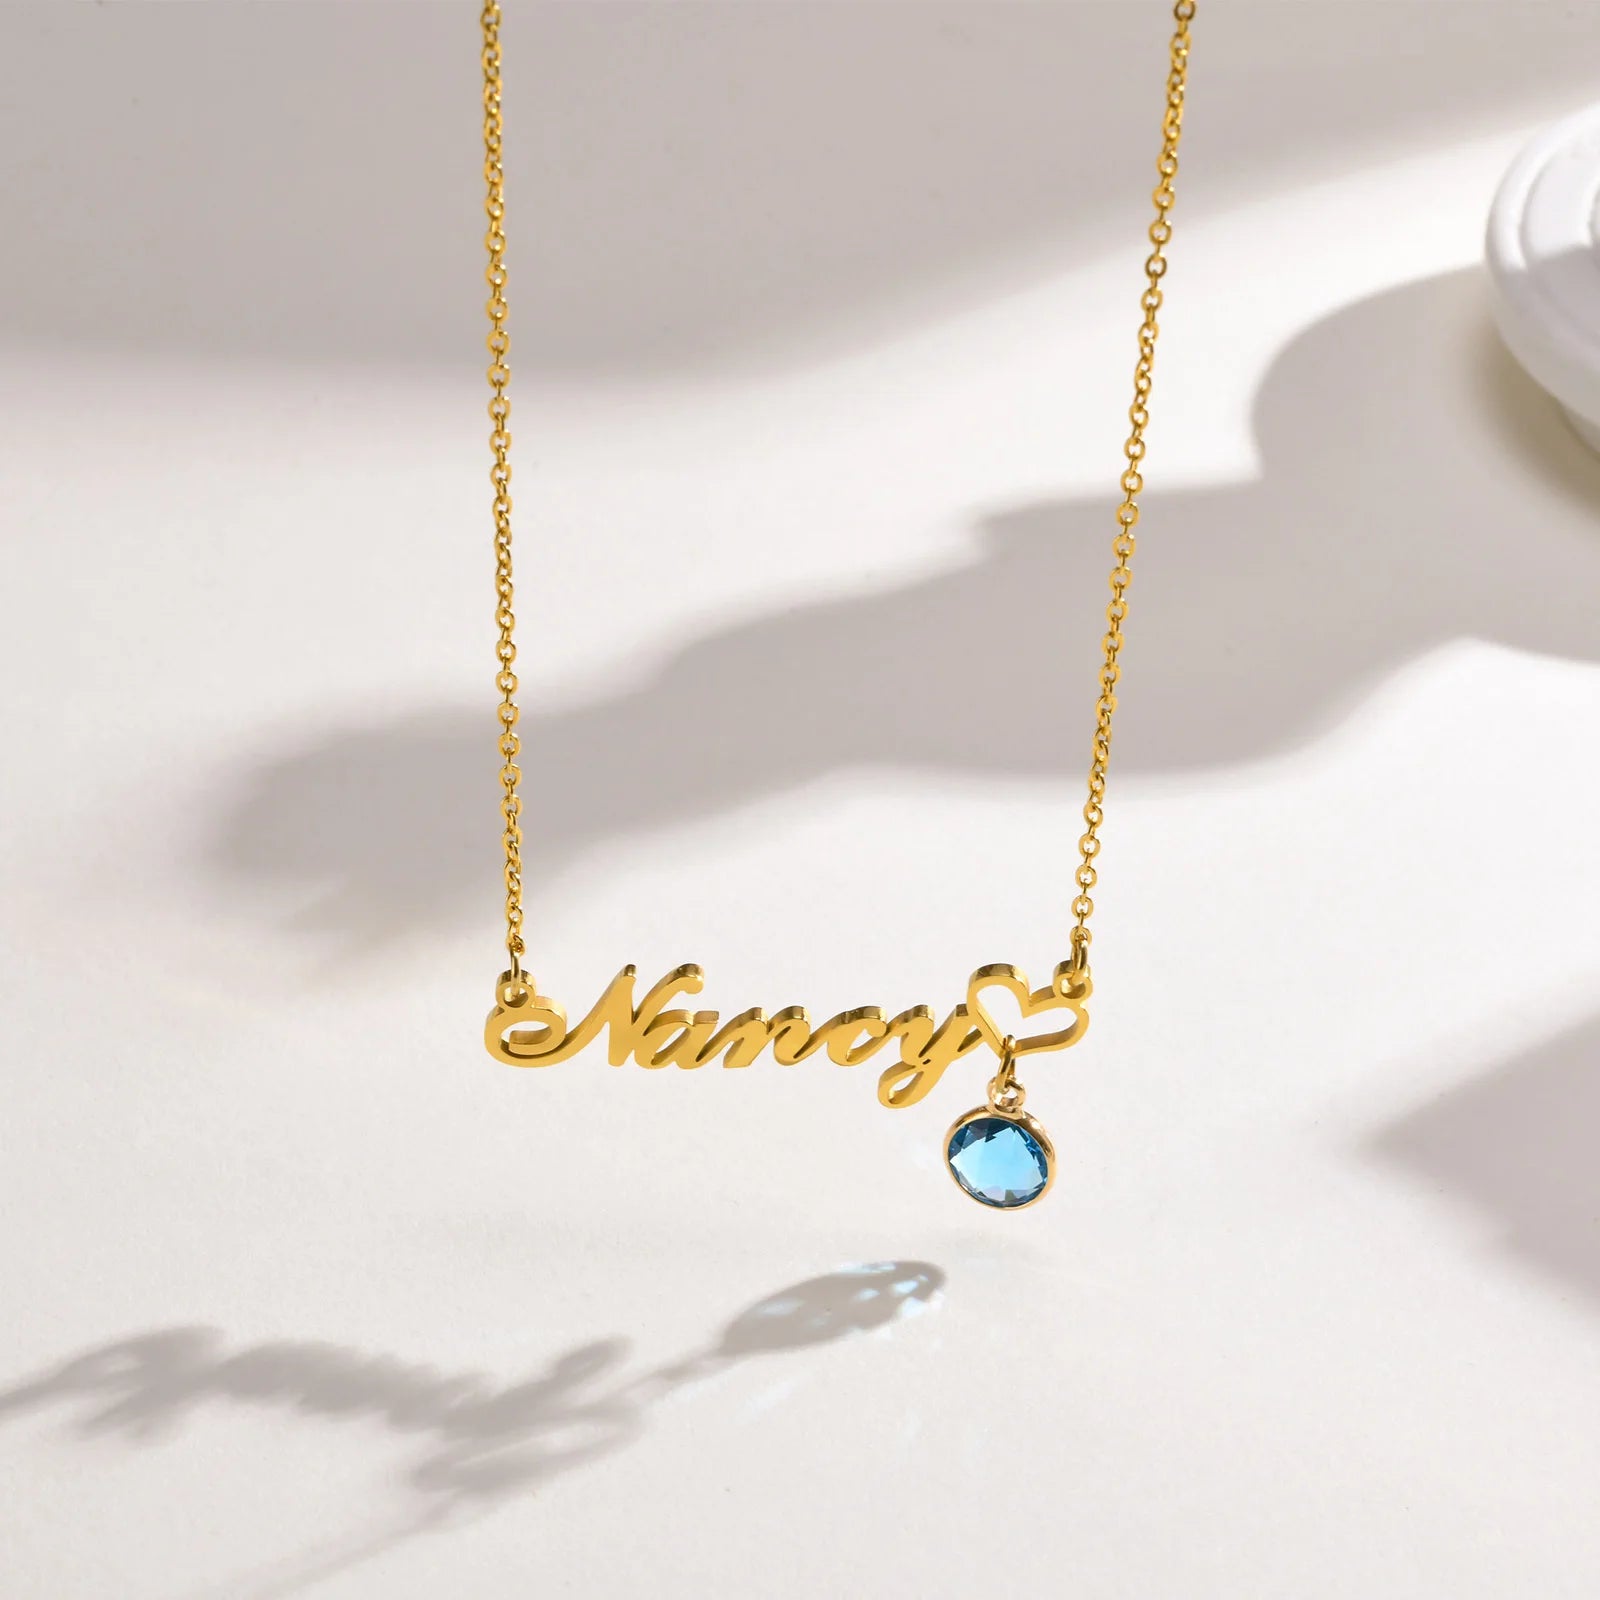 Luxury Stainless Steel IP Gold Plated Personalized Name Birthstones Pendant Necklace